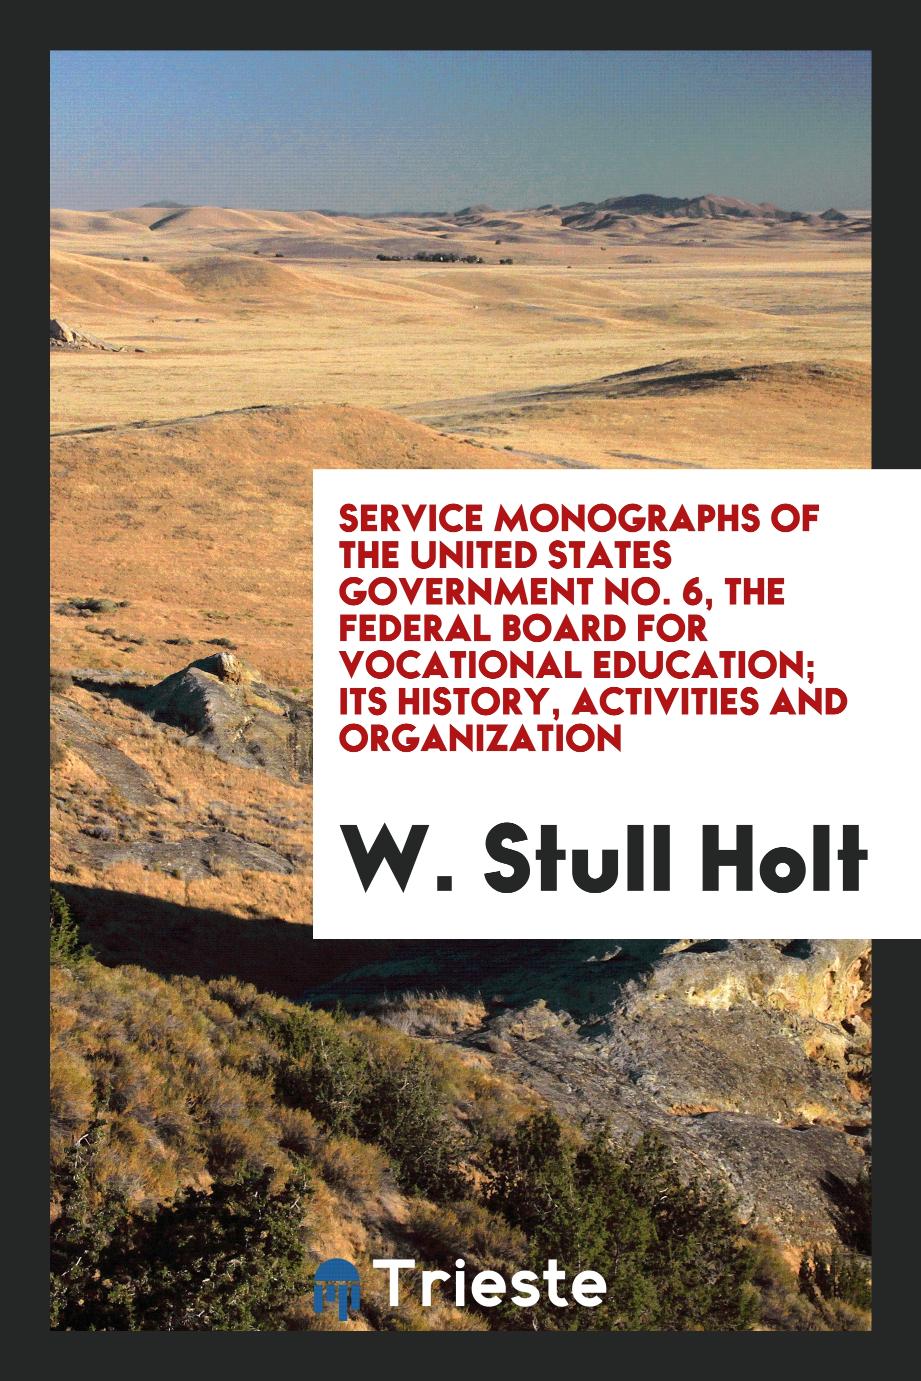 Service Monographs of the United States Government No. 6, The Federal Board for vocational education; its history, activities and organization